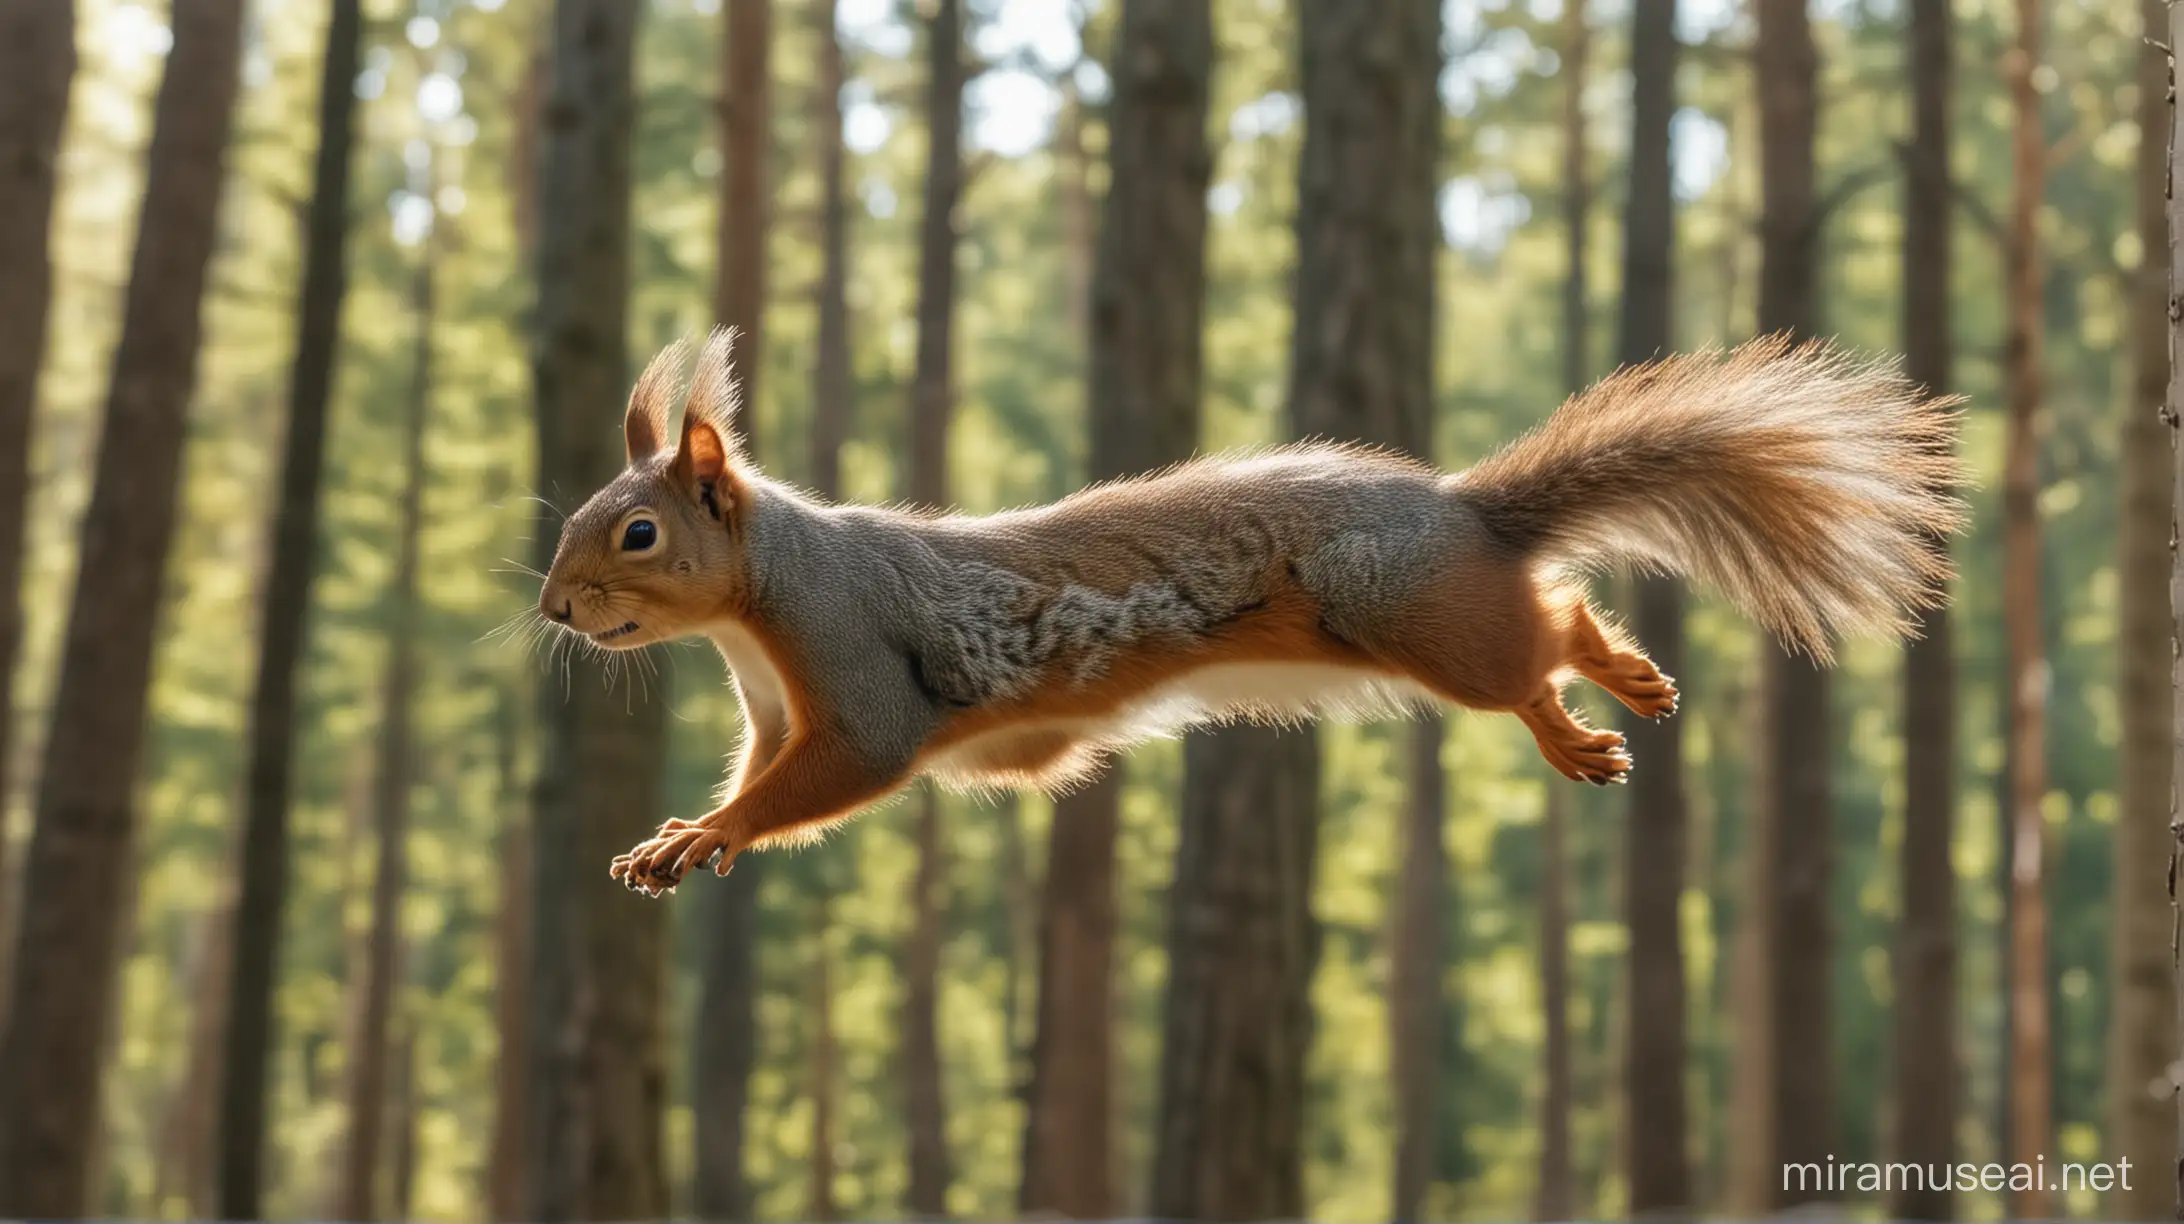 Sunny Day Forest Scene Agile Squirrel in Flight Amongst Lush Trees